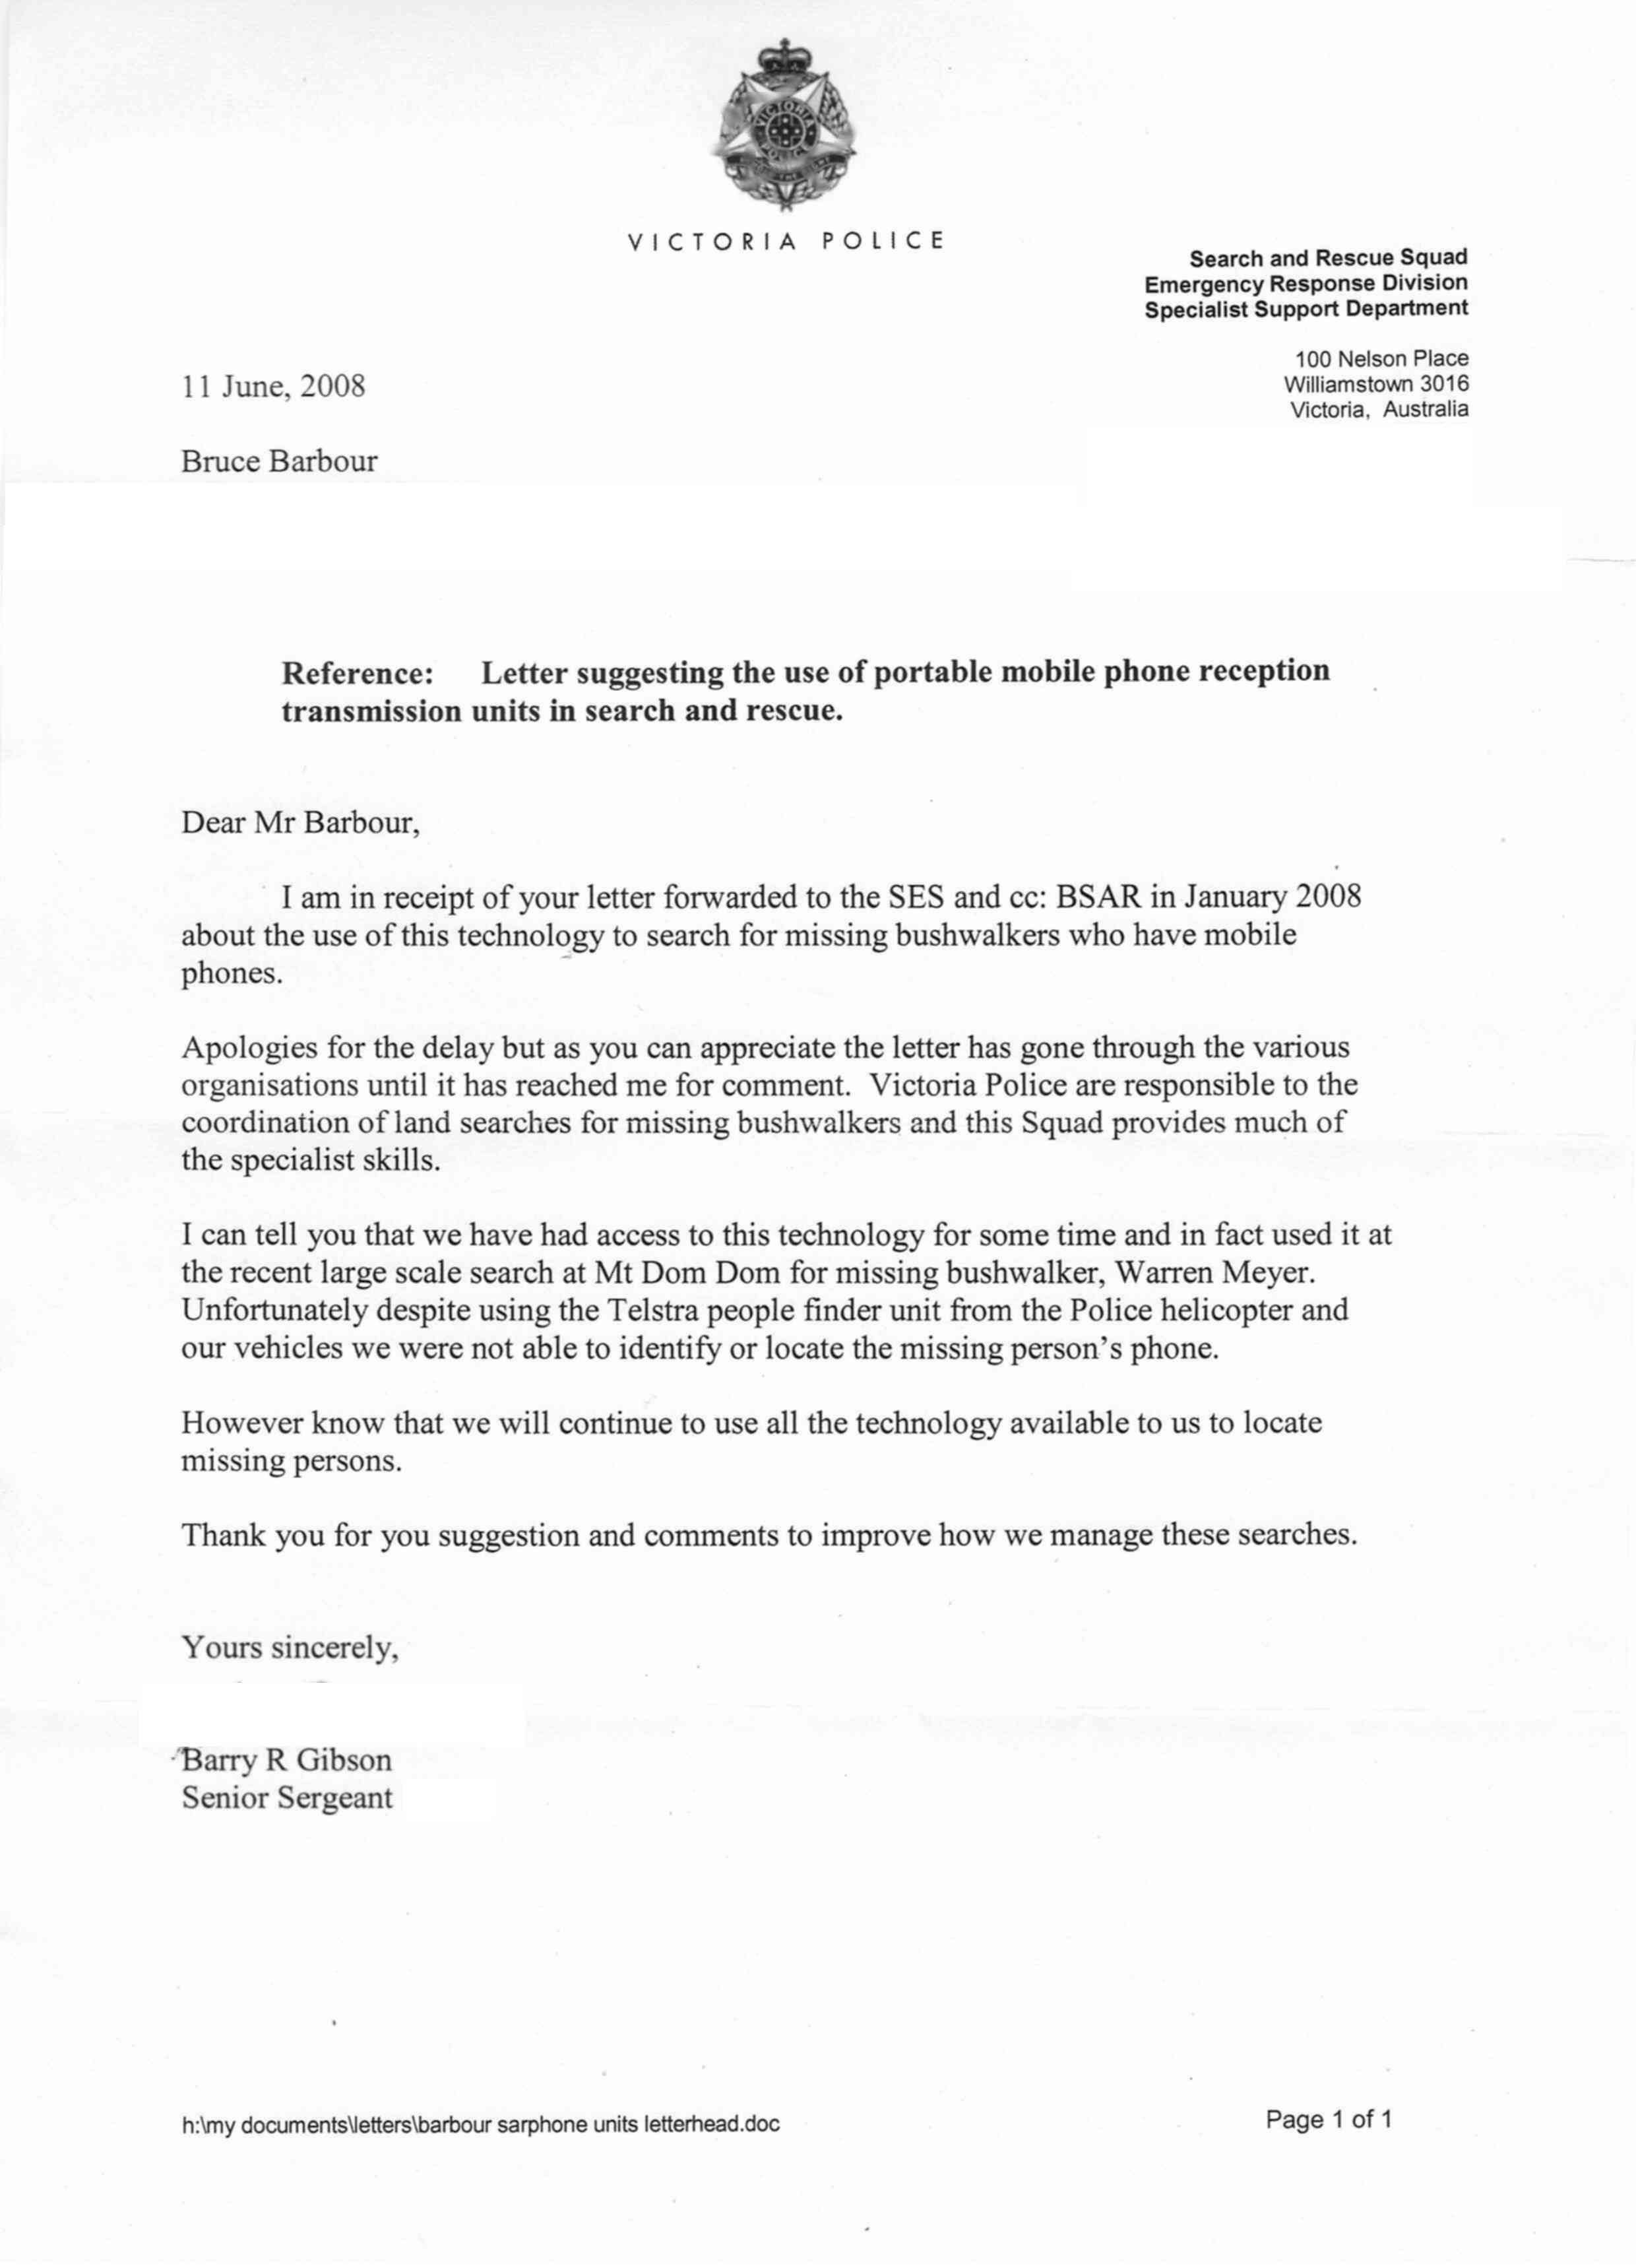 Response Letter From Victorian Police Search and
                Rescue